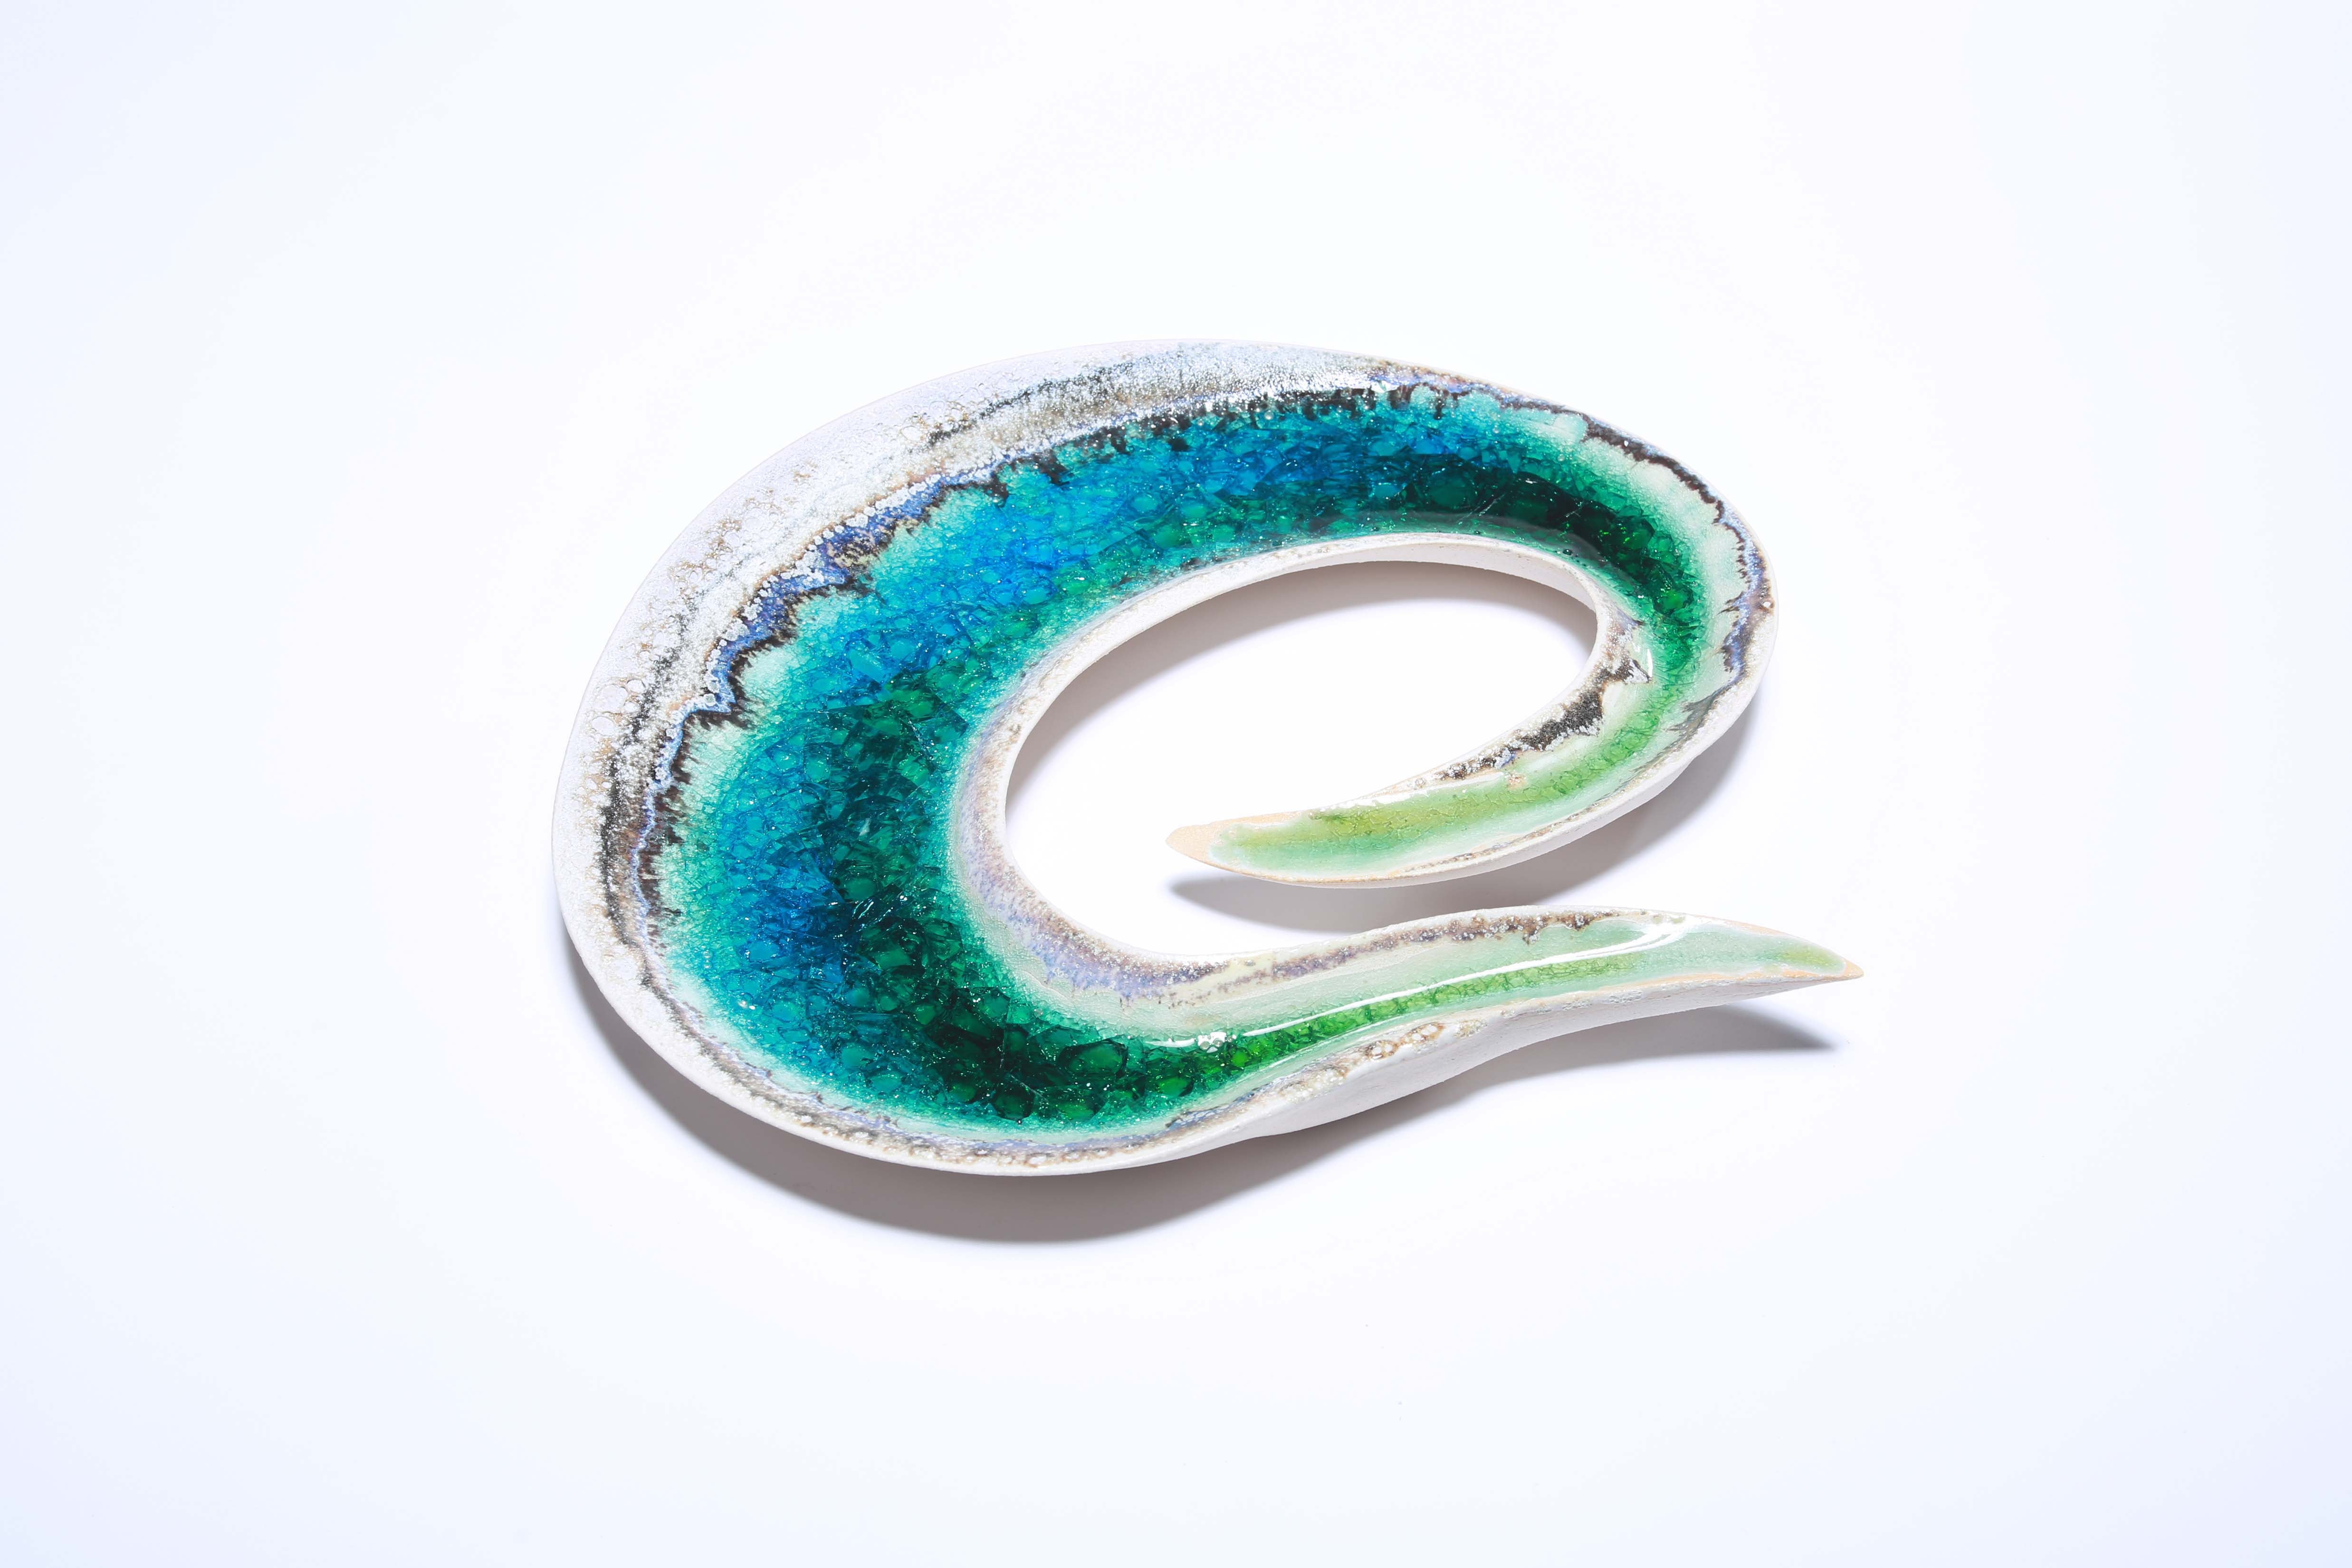 Swirl, Sculptural Vessel, Wall Art  Extra Large with Blue and Green Glass